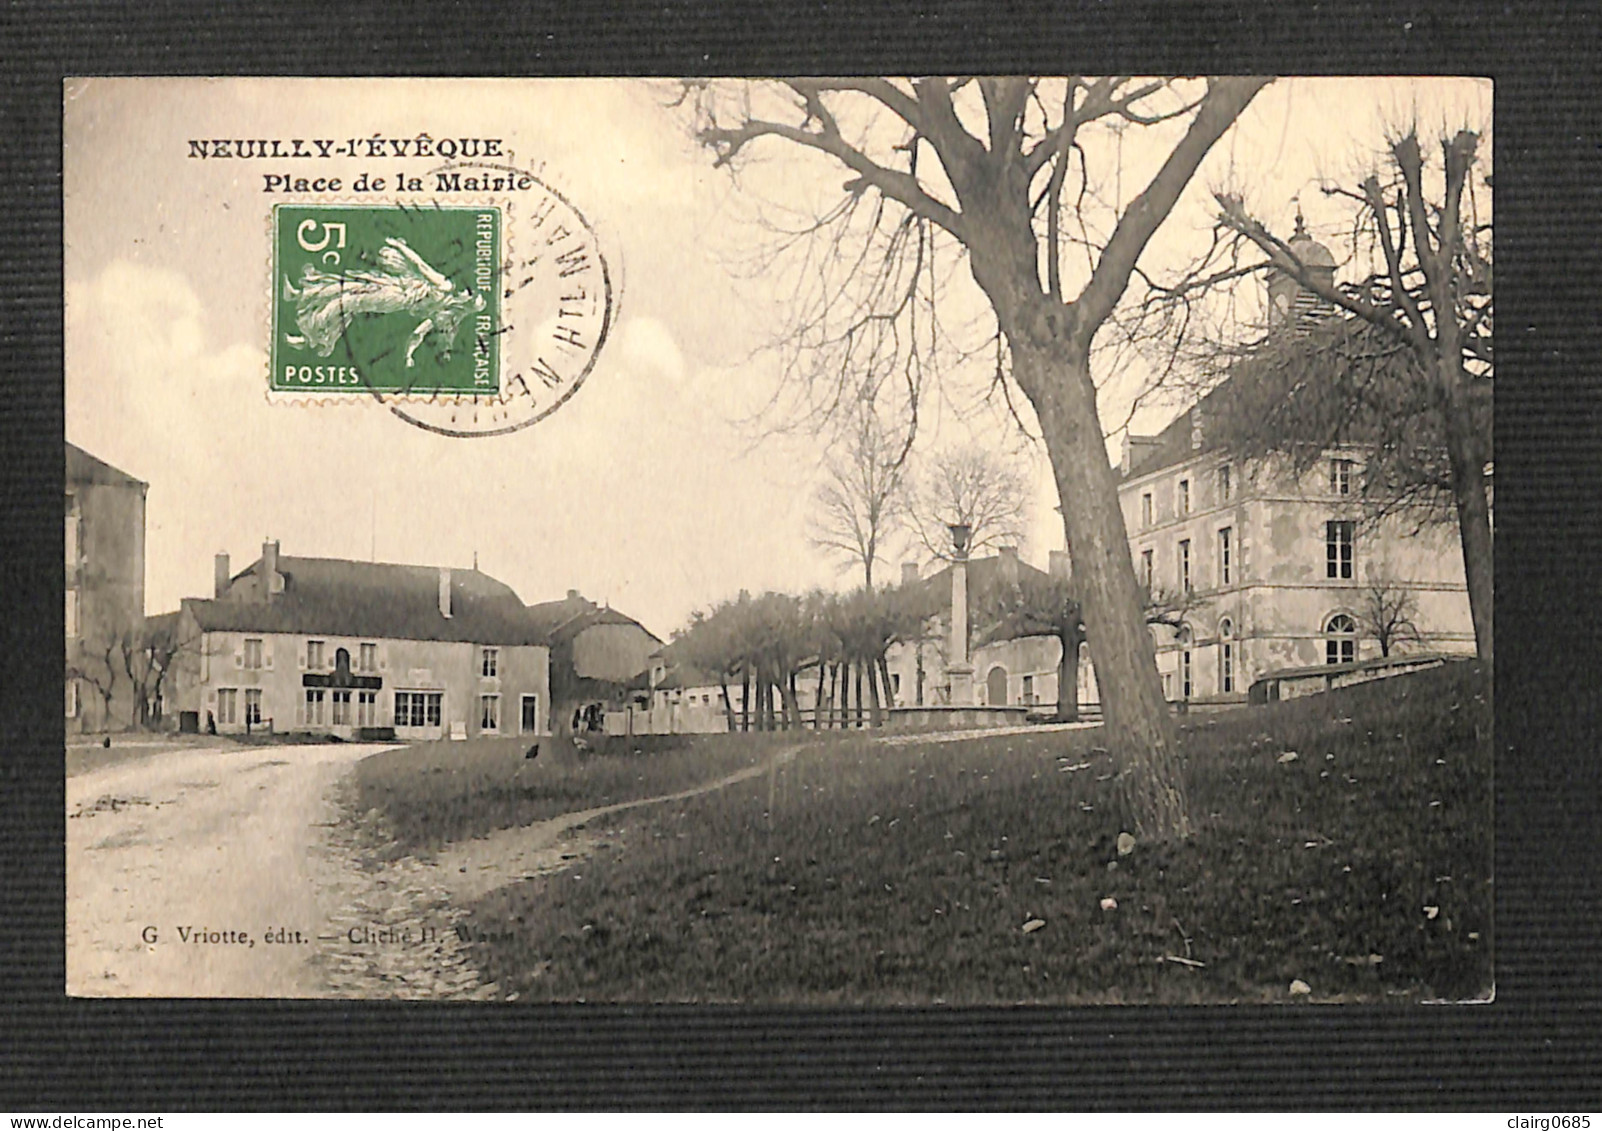 52 - NEUILLY L'EVEQUE - Place De La Mairie - 1913 - Neuilly L'Eveque